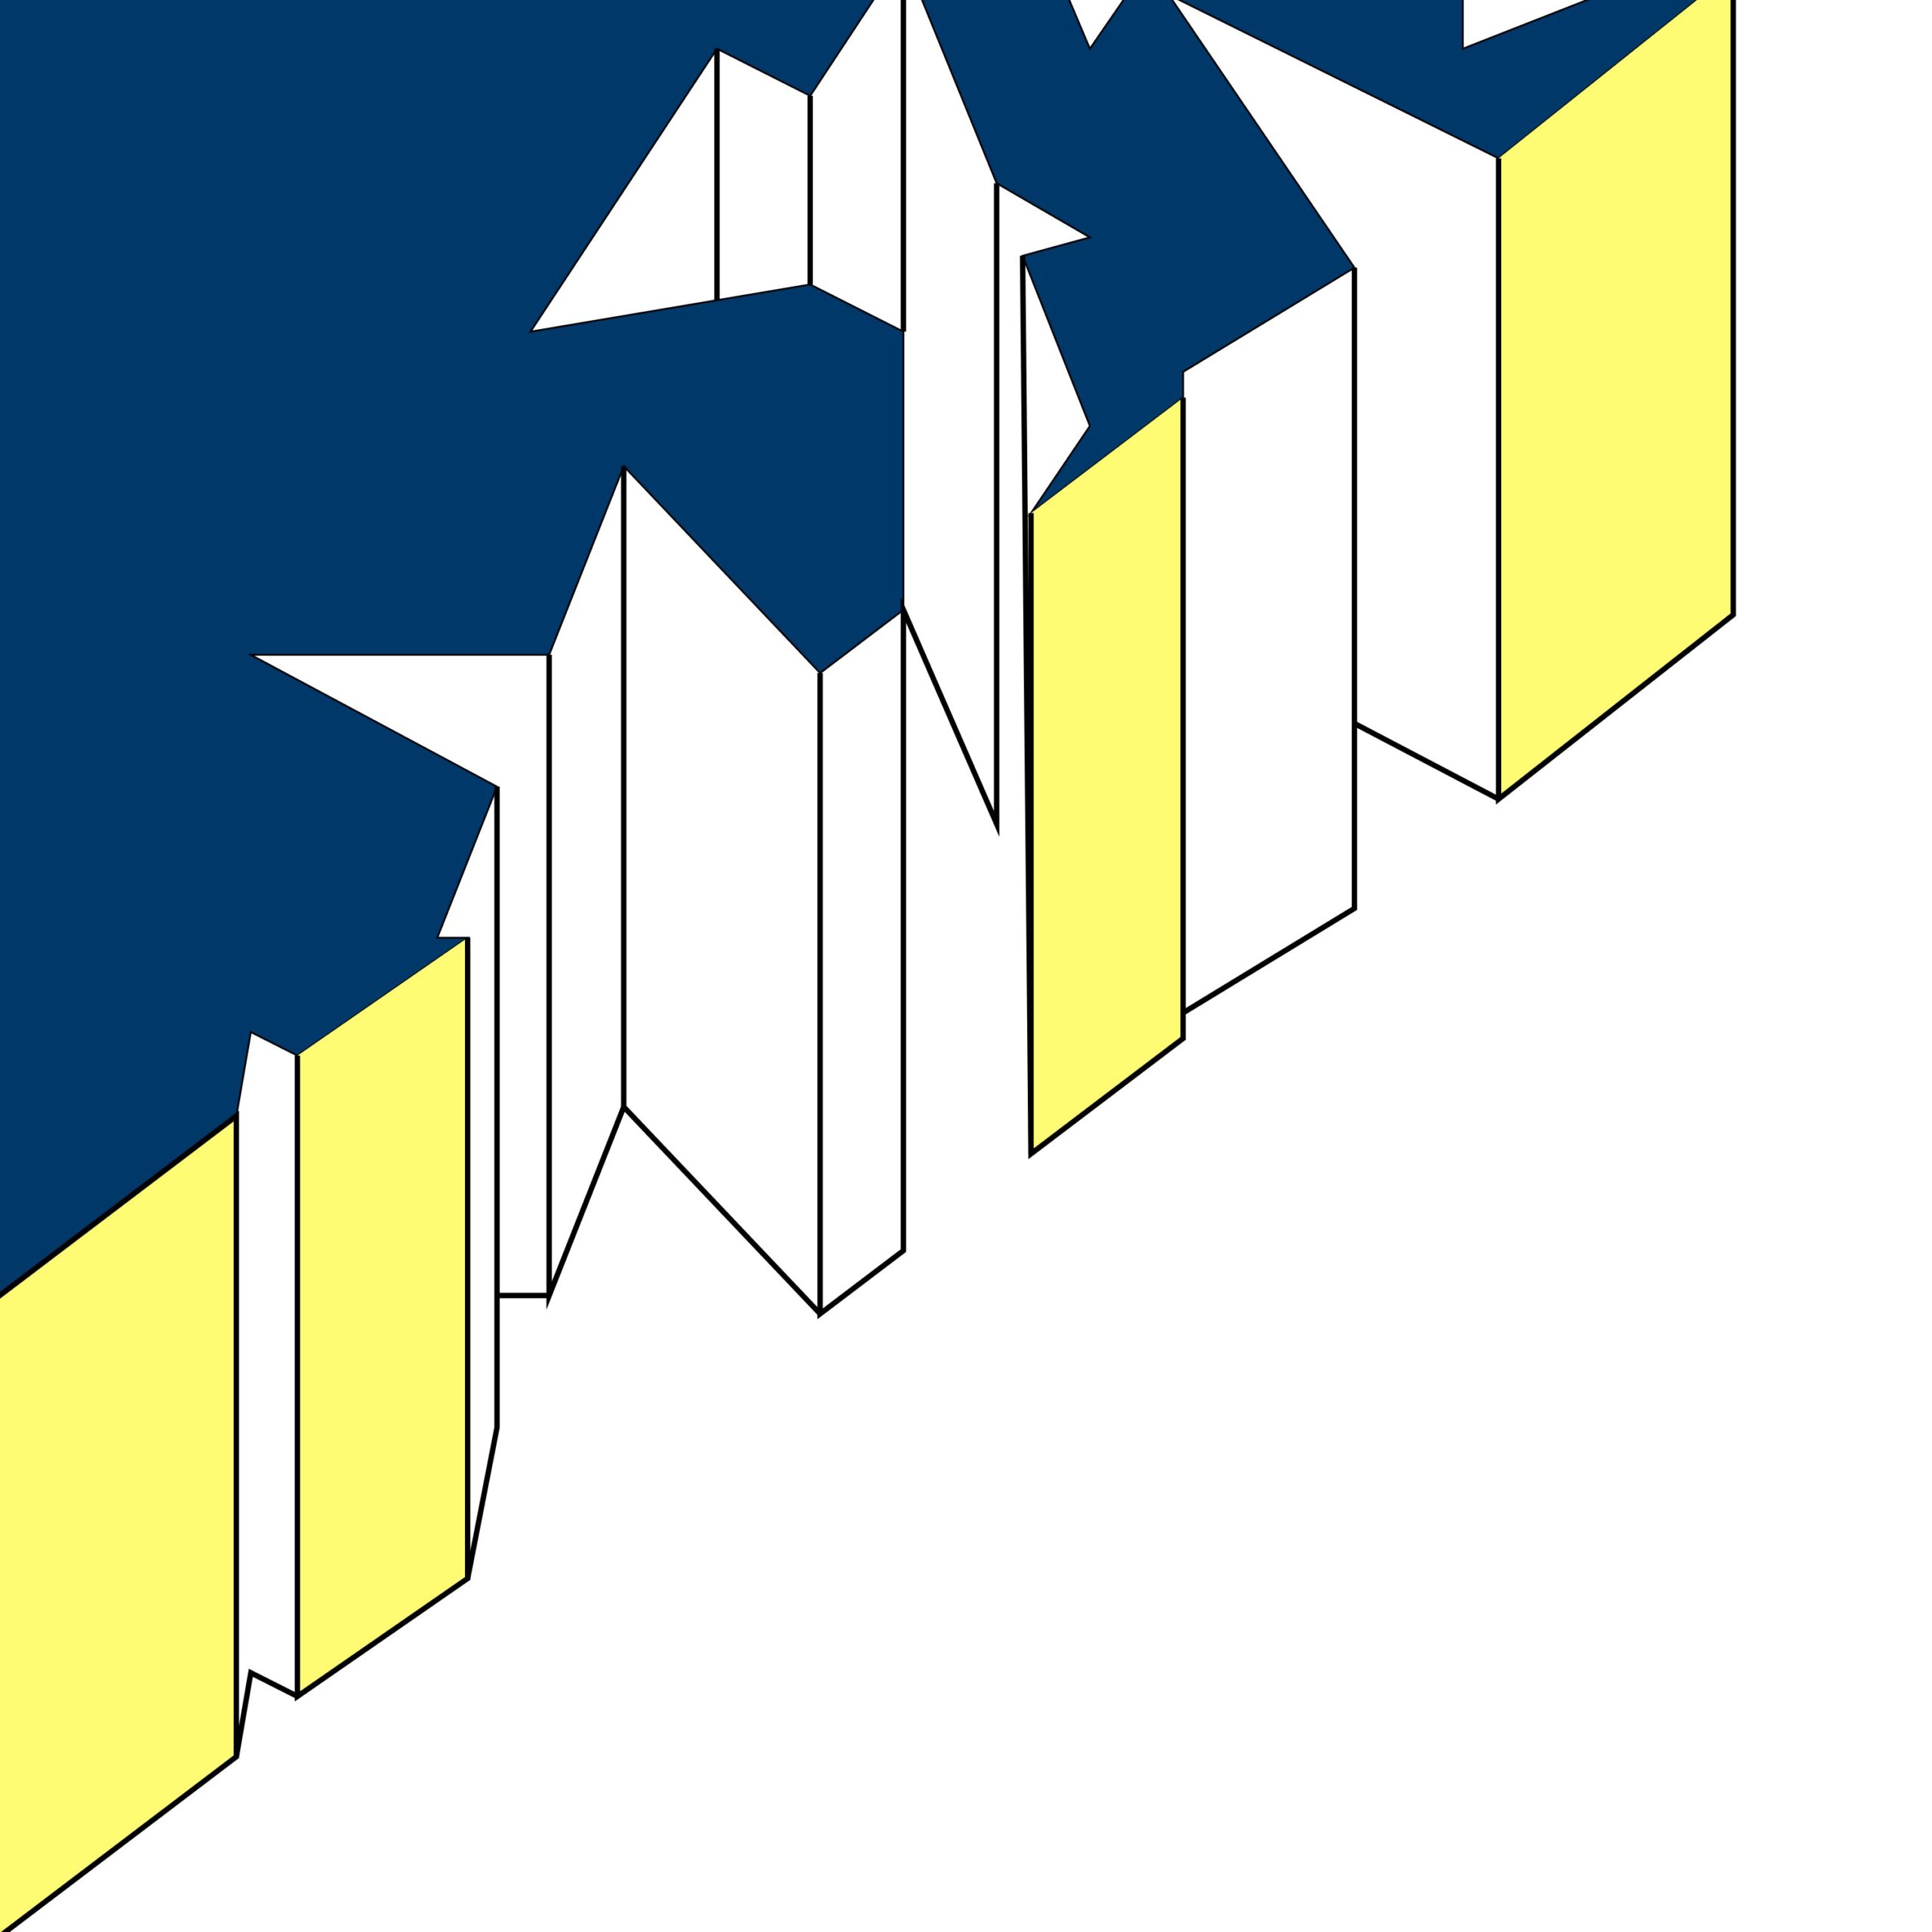 Illustration of a 3D triangular shape in dark blue and light yellow on a white background